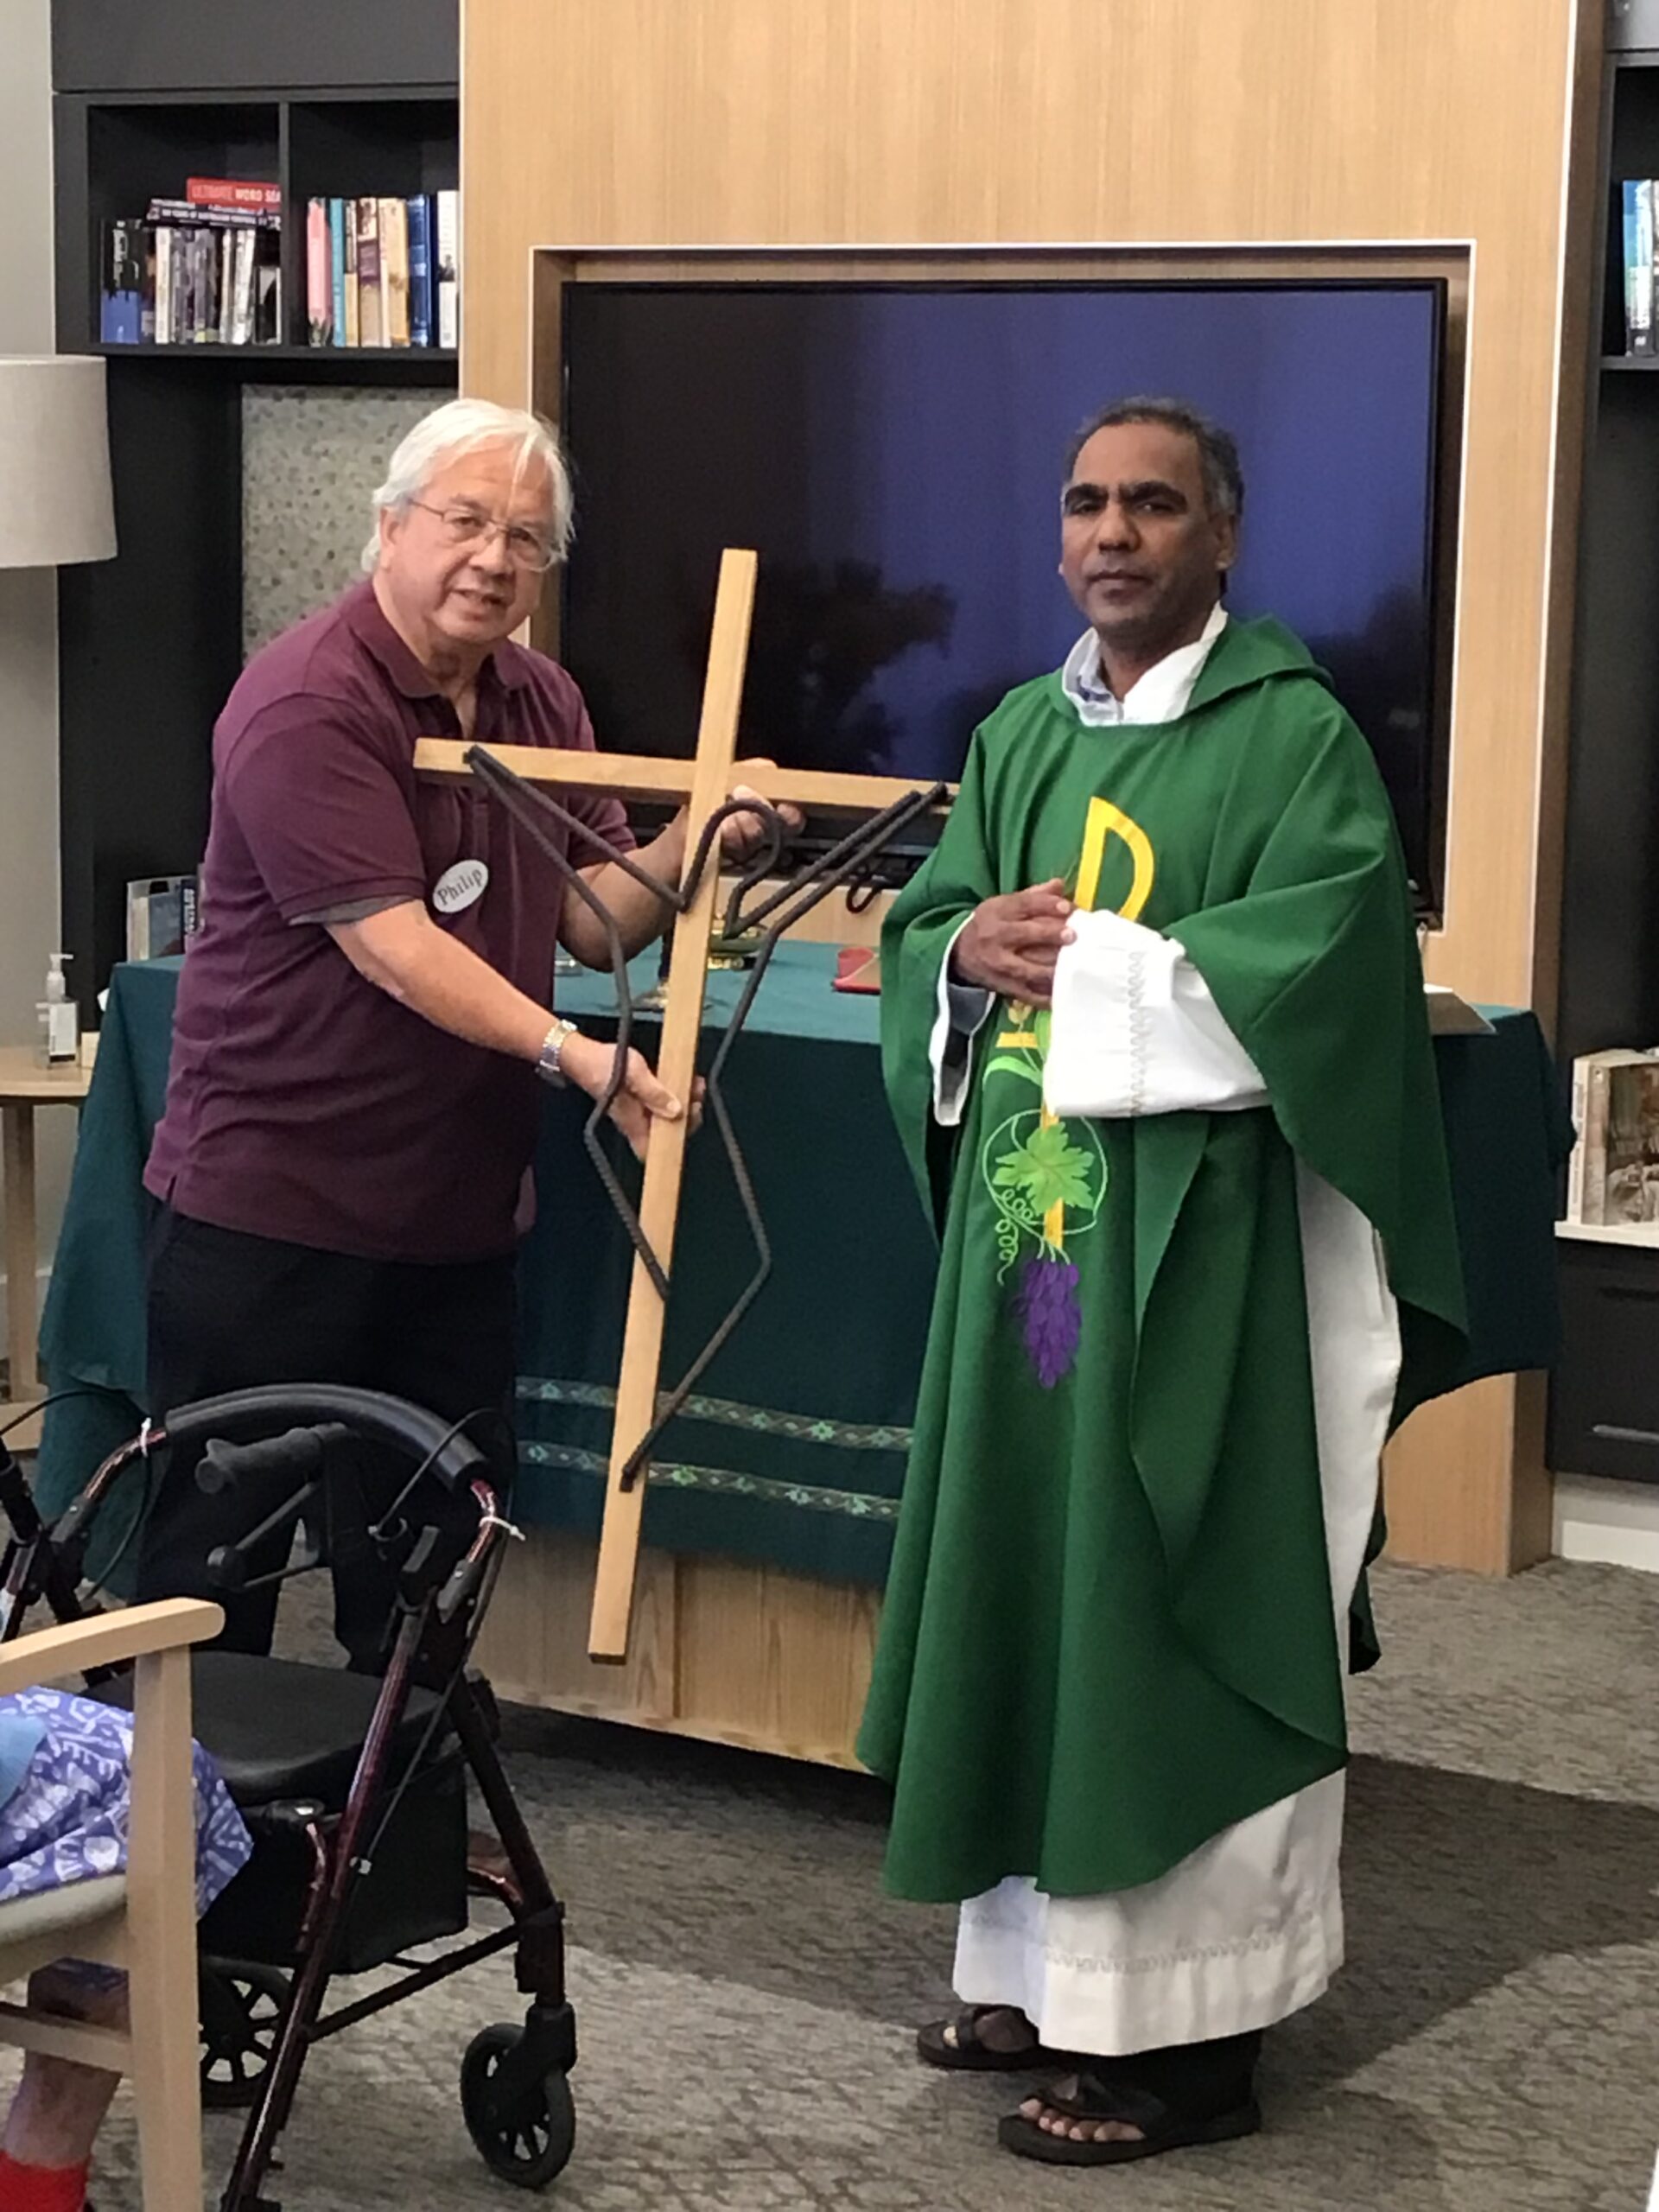 Pastoral Care Practitioner Philip Carrier assisted Fr Arulraj from St Mary’s Guildford with a special Mass.